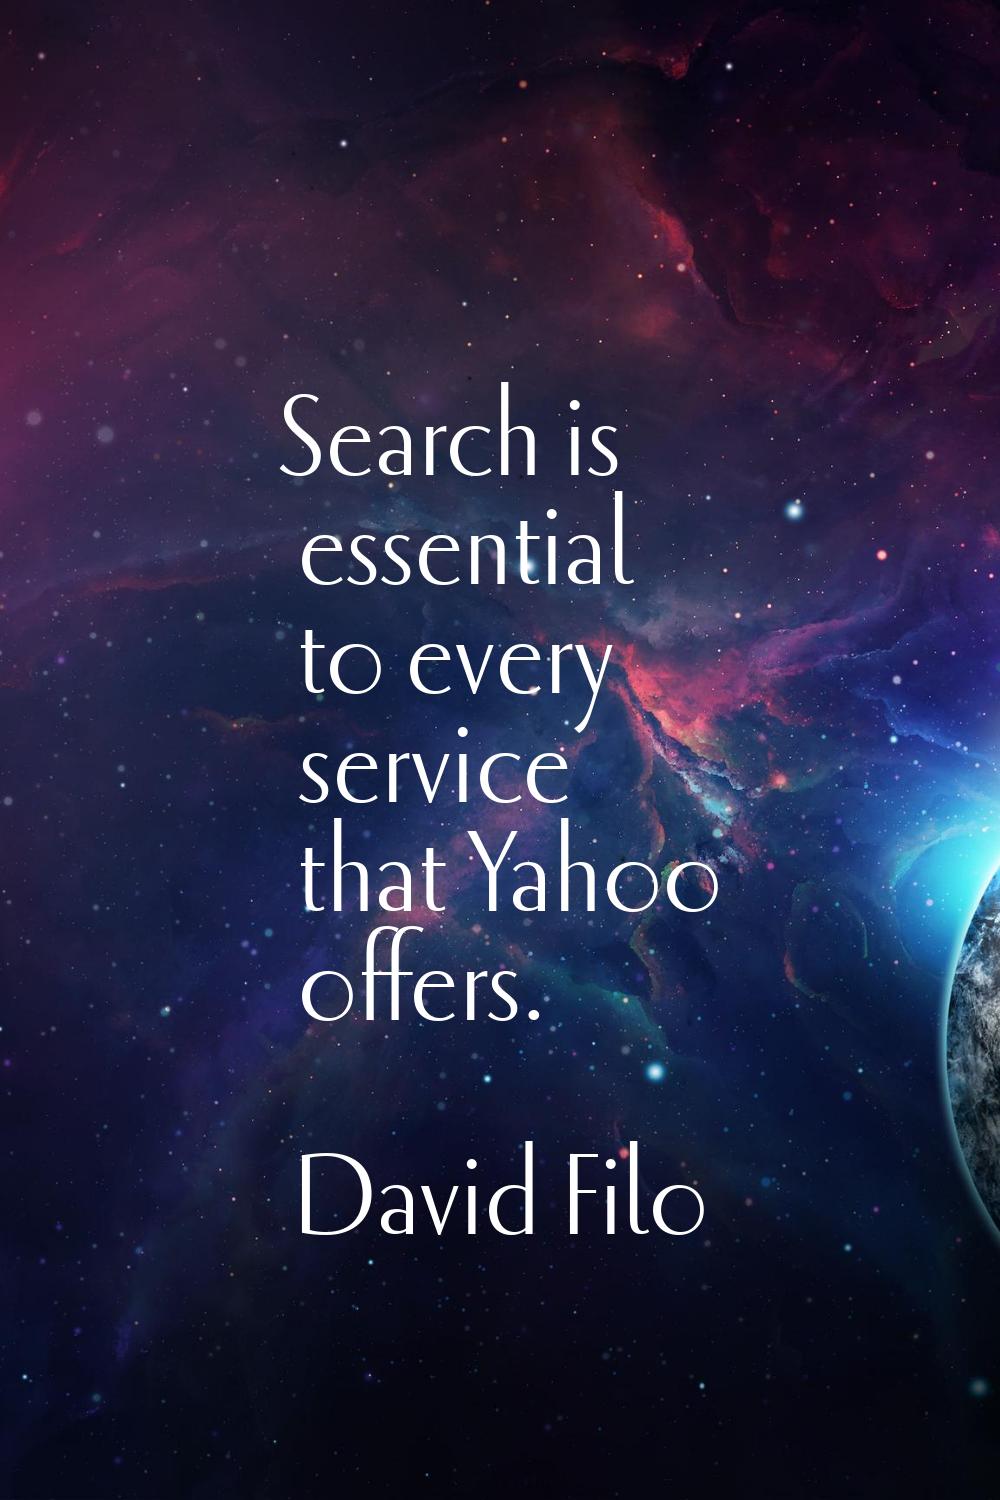 Search is essential to every service that Yahoo offers.